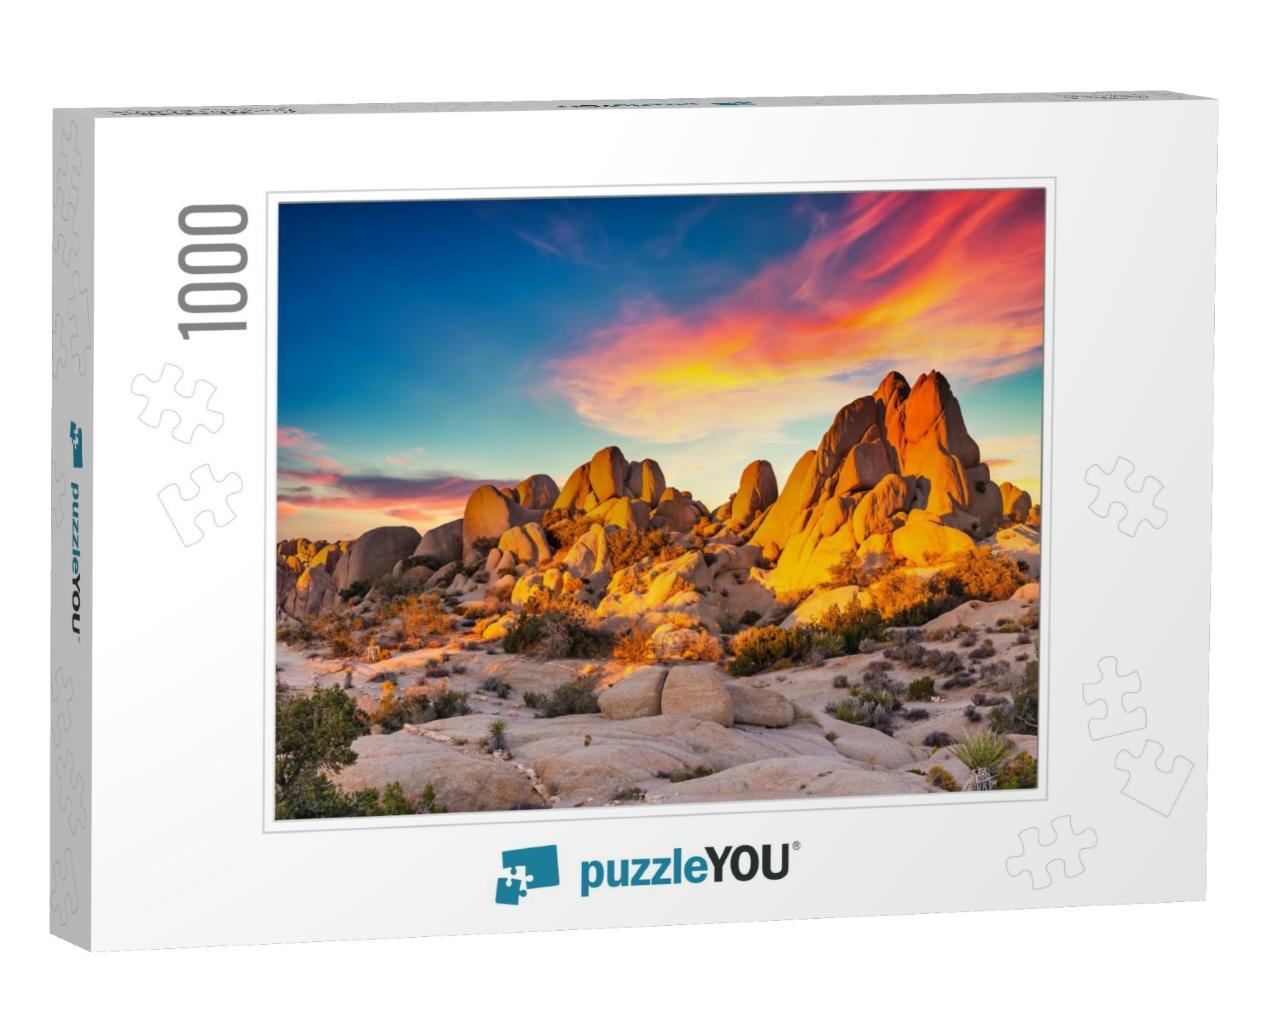 Rocks in Joshua Tree National Park Illuminated by Sunset... Jigsaw Puzzle with 1000 pieces